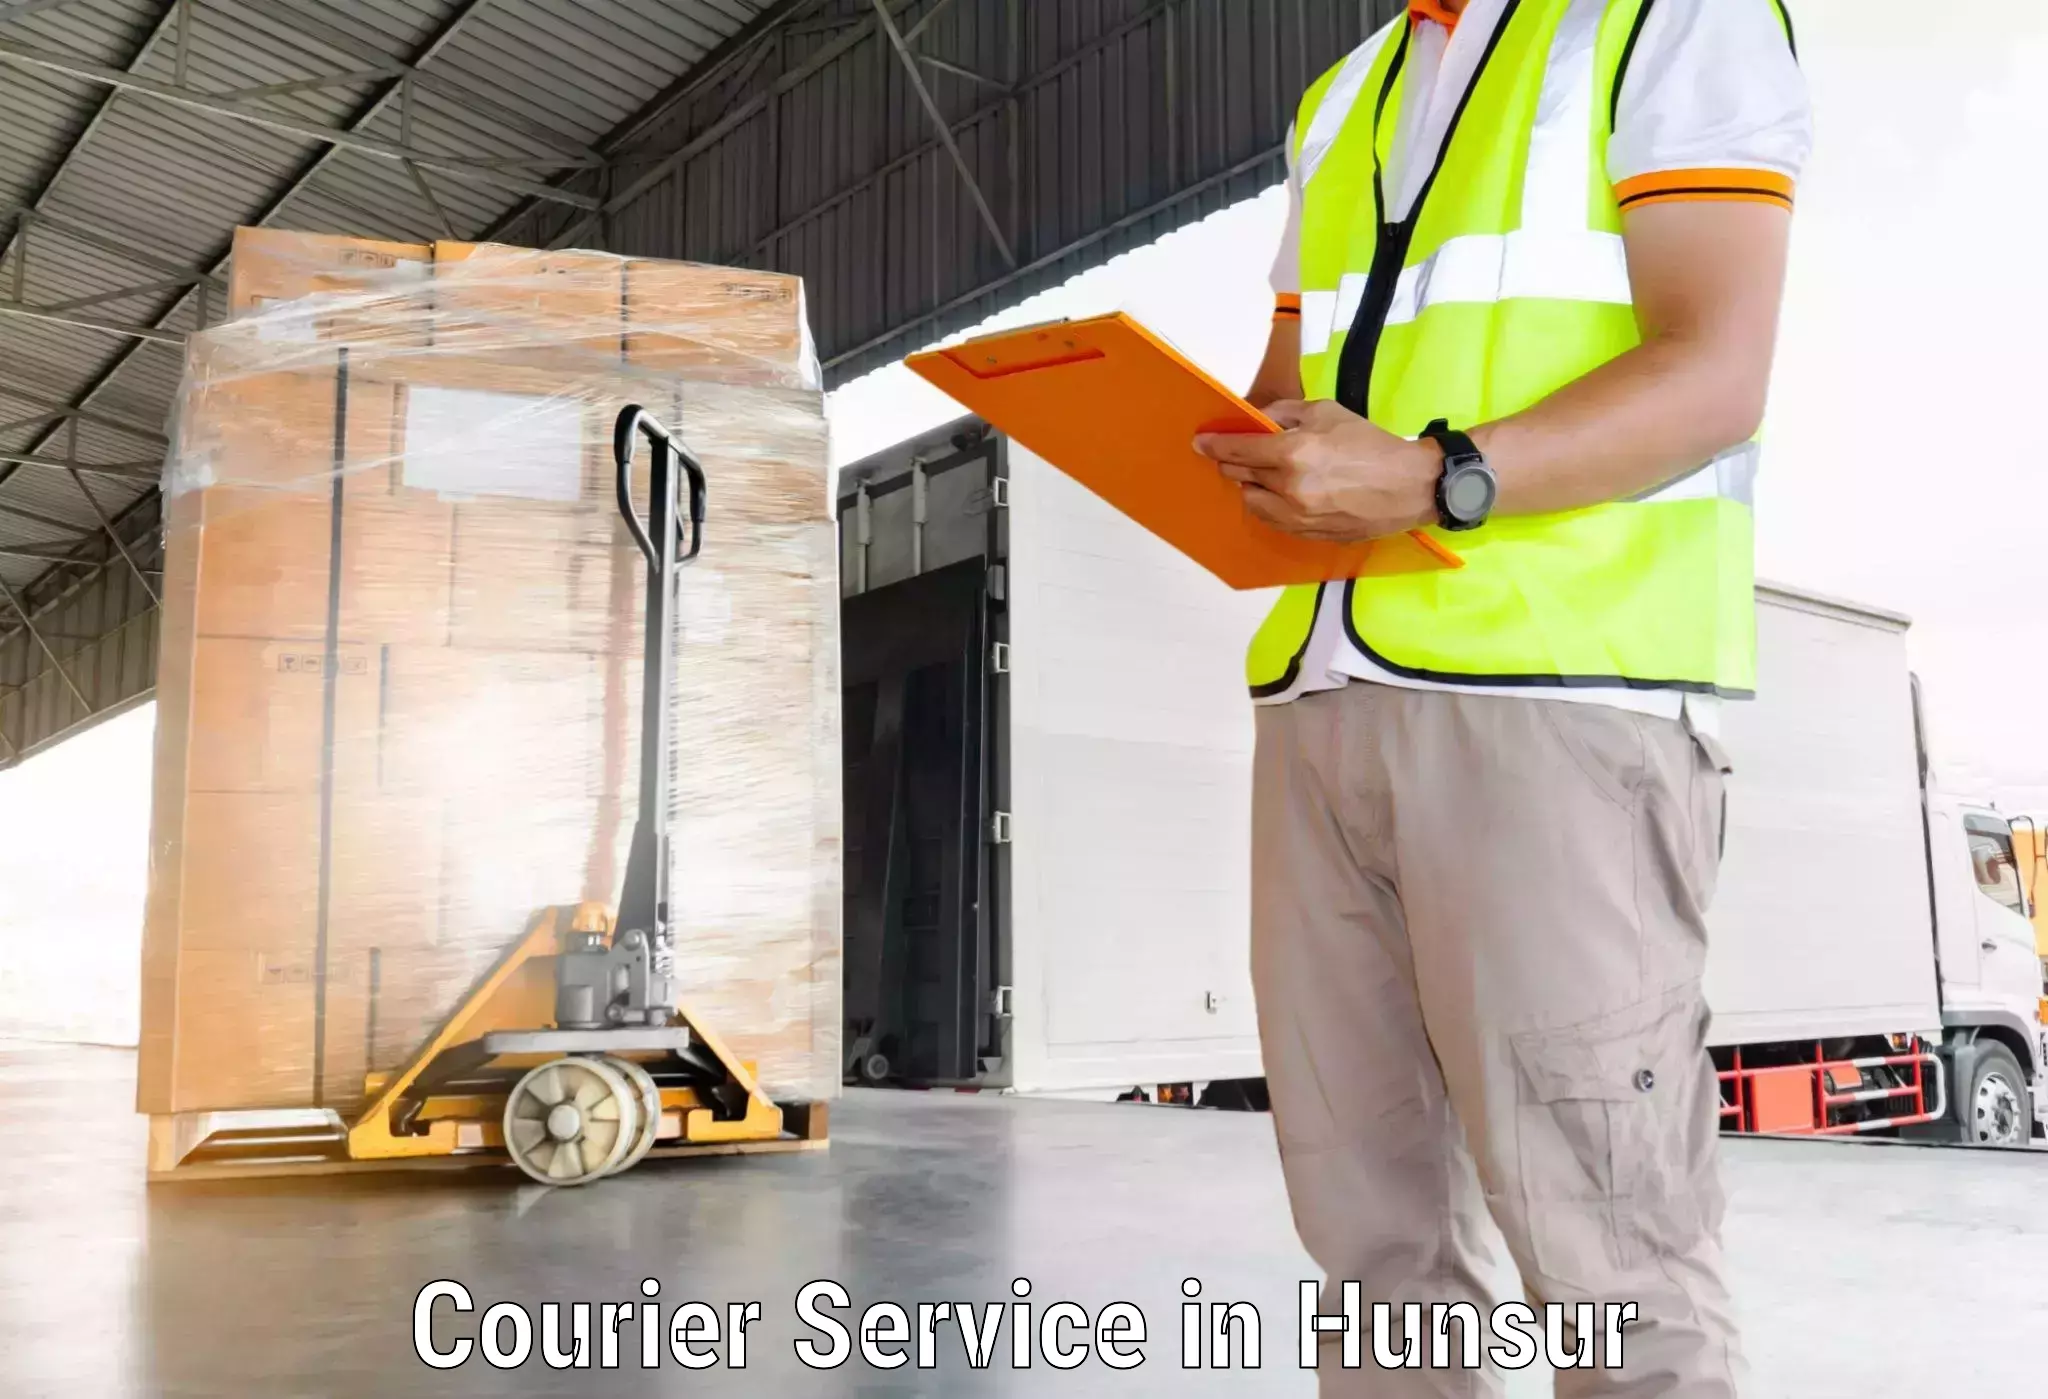 Dynamic courier operations in Hunsur